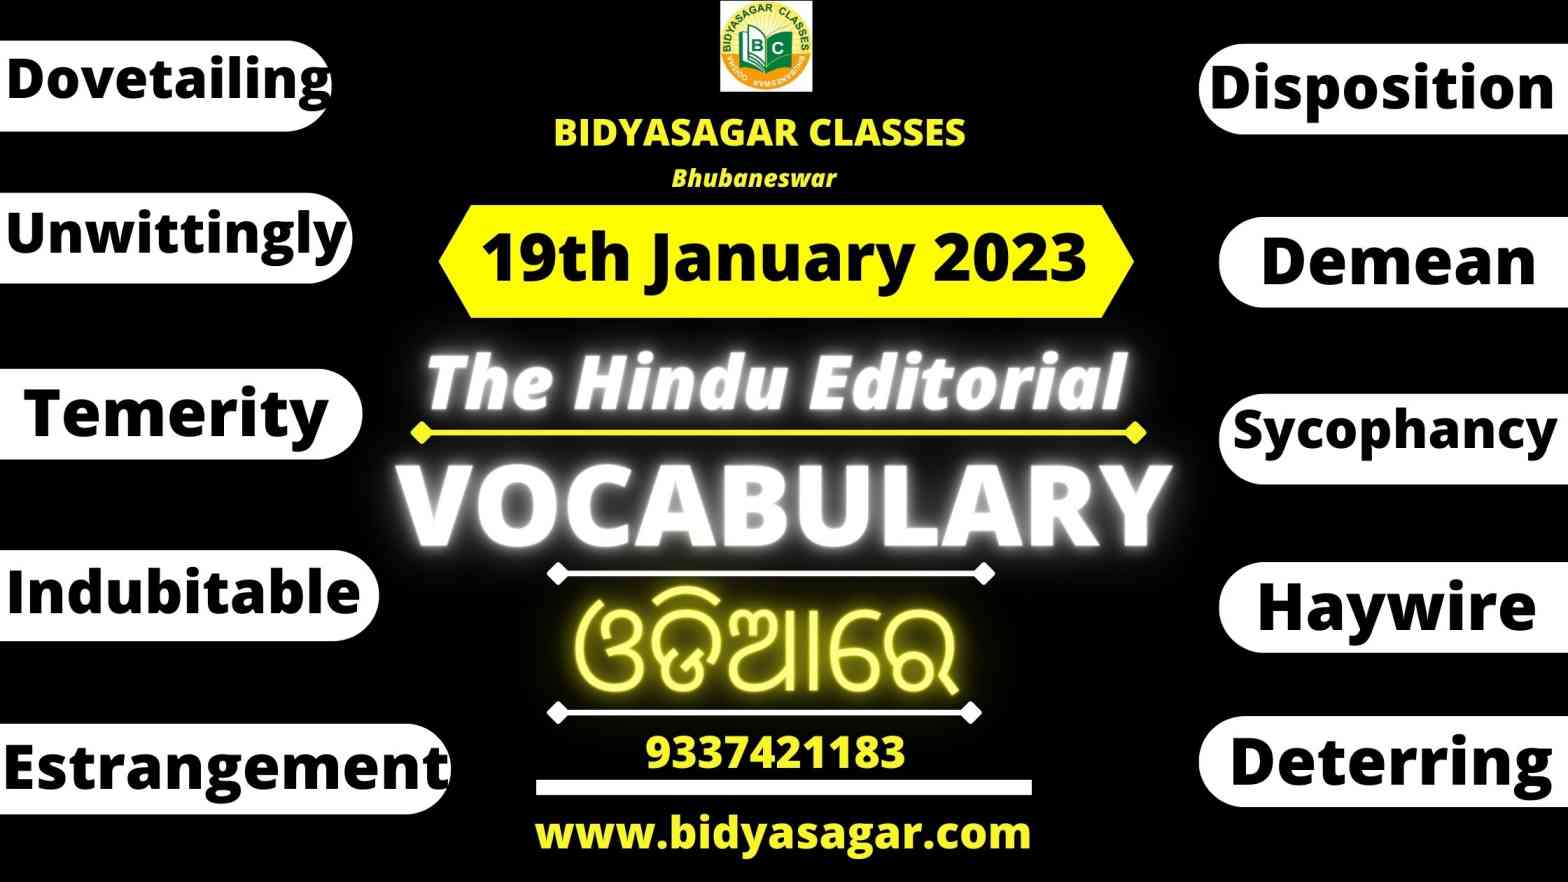 The Hindu Editorial Vocabulary of 19th January 2023